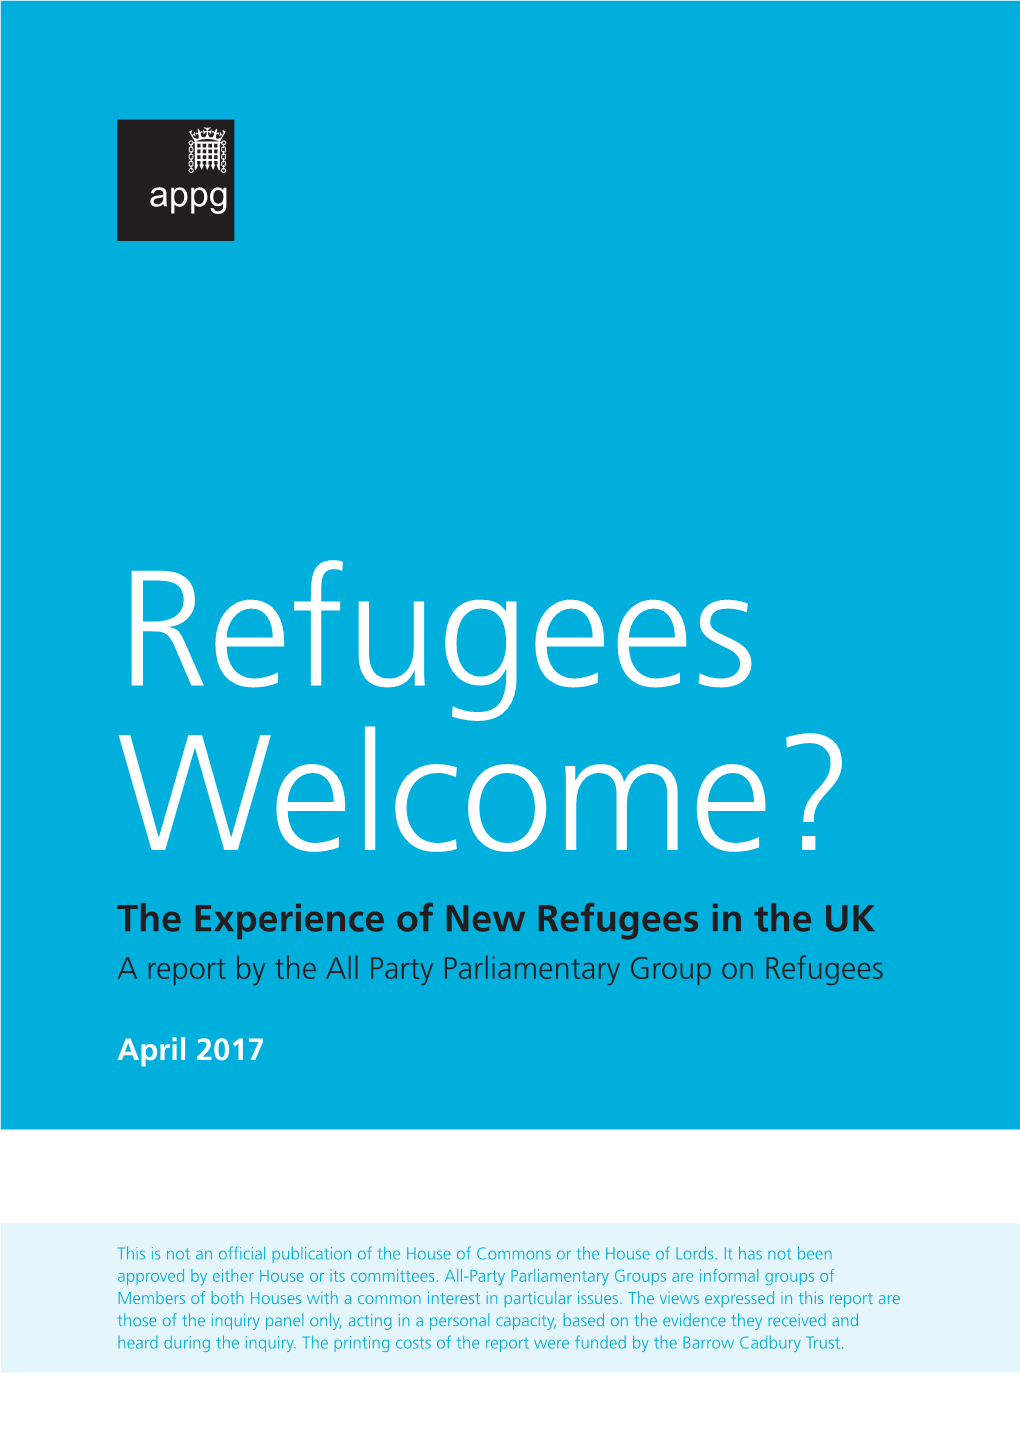 Refugees Welcome? the Experience of New Refugees in the UK a Report by the All Party Parliamentary Group on Refugees